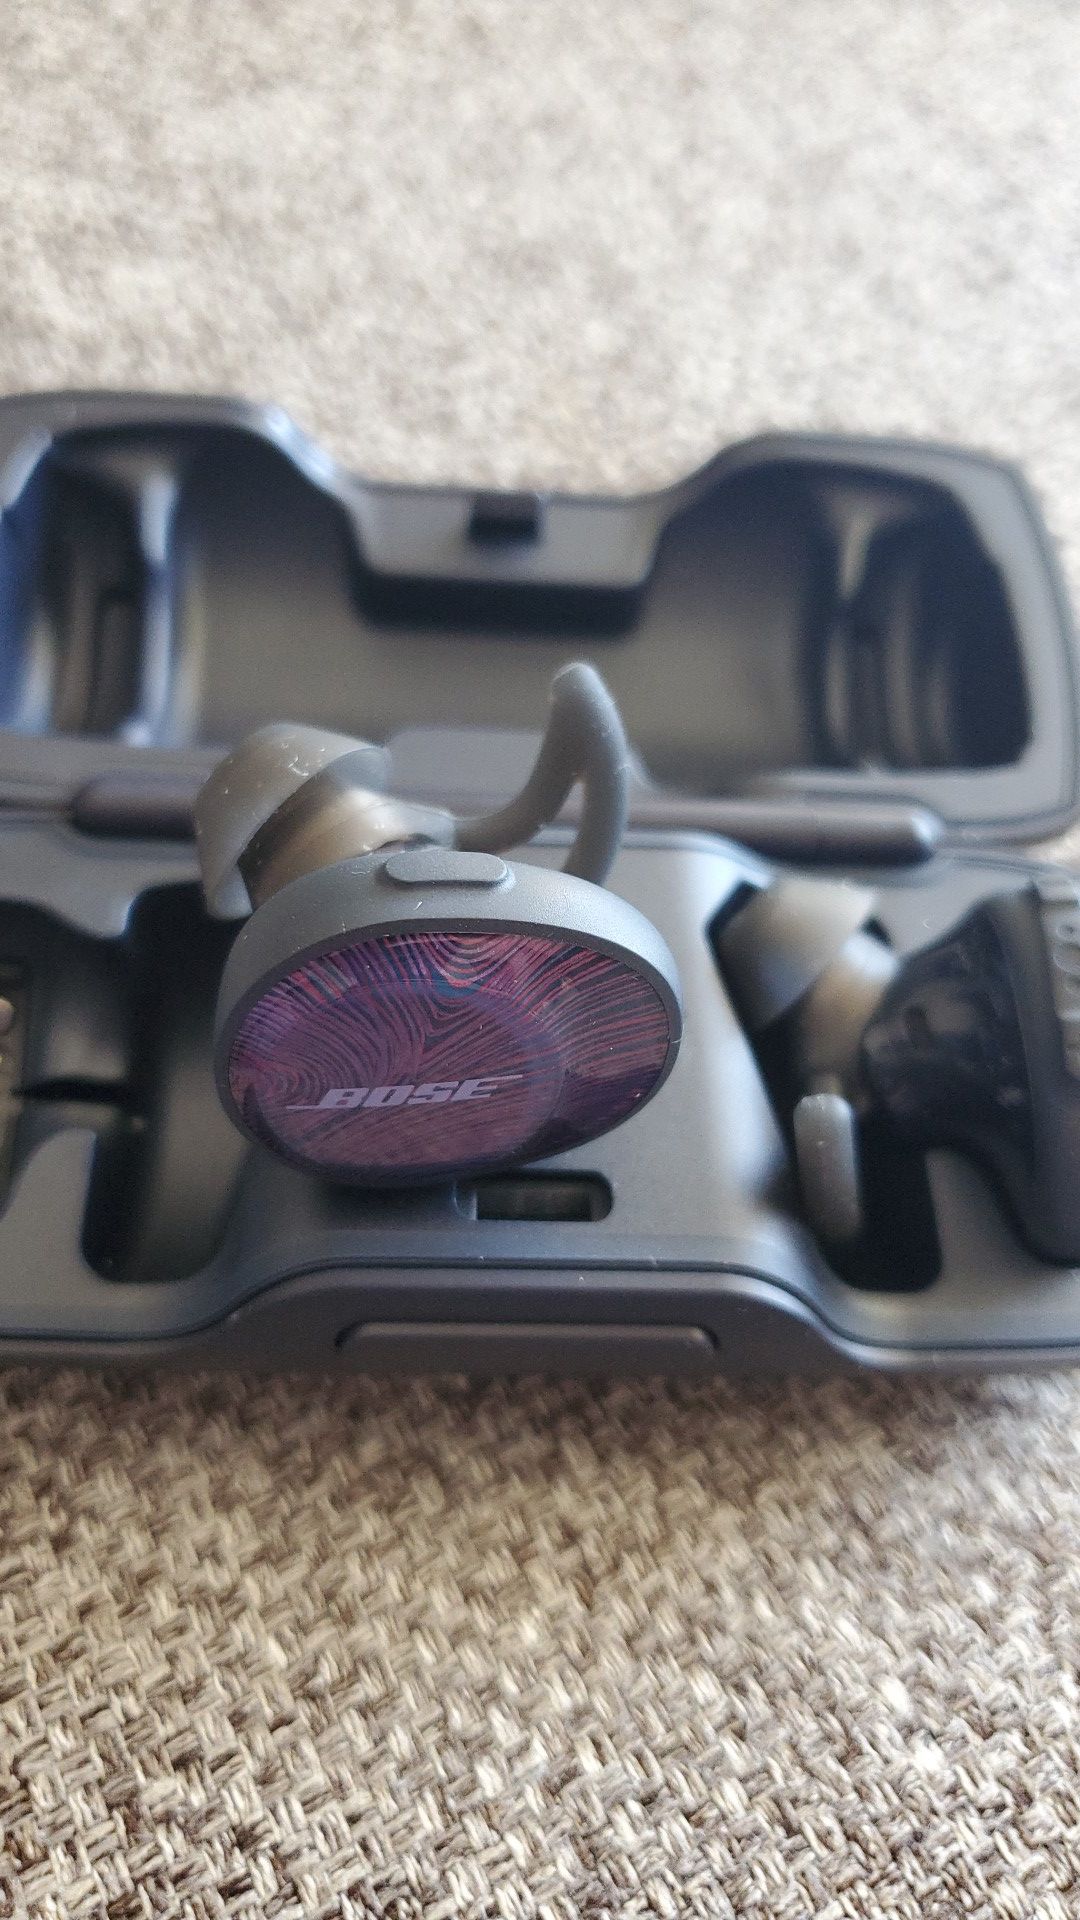 Bose wireless earbuds limited edition